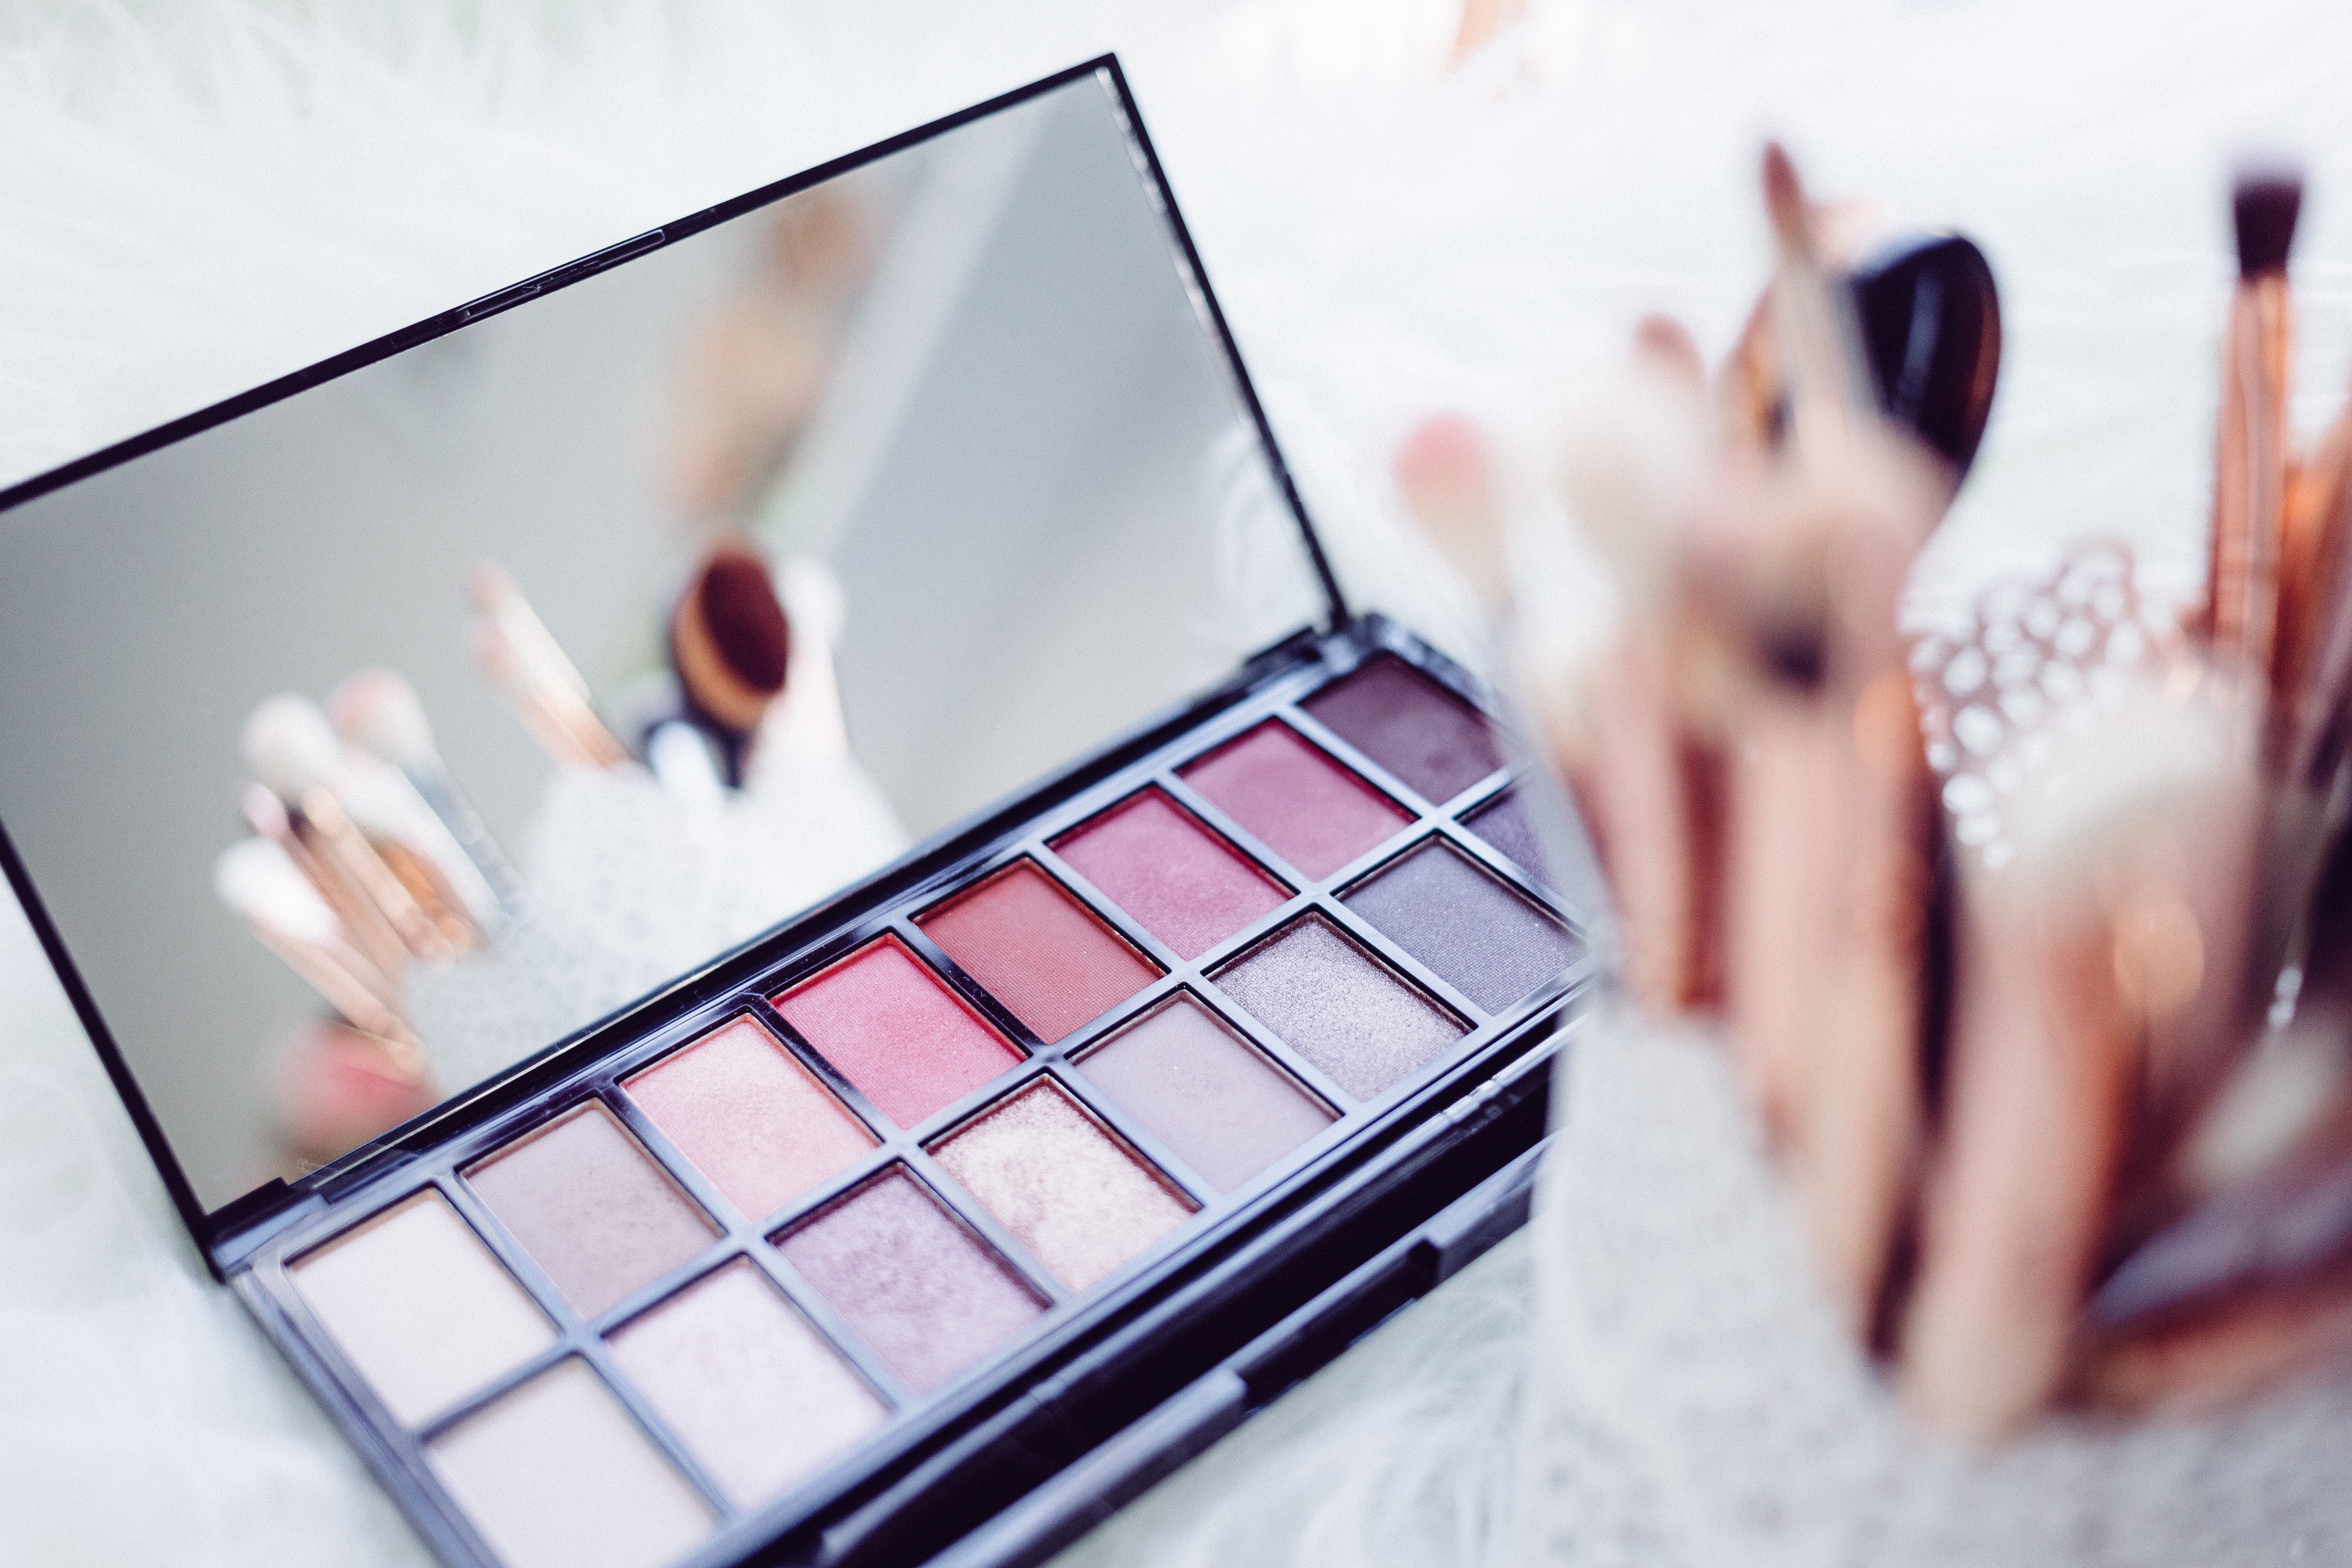 Find Hair And Makeup Artists in   Fremantle Get the best prices from 2,000+ of the most reviewed Hair And Makeup Artists  near Fremantle. Pick from mobile stylists or salons.